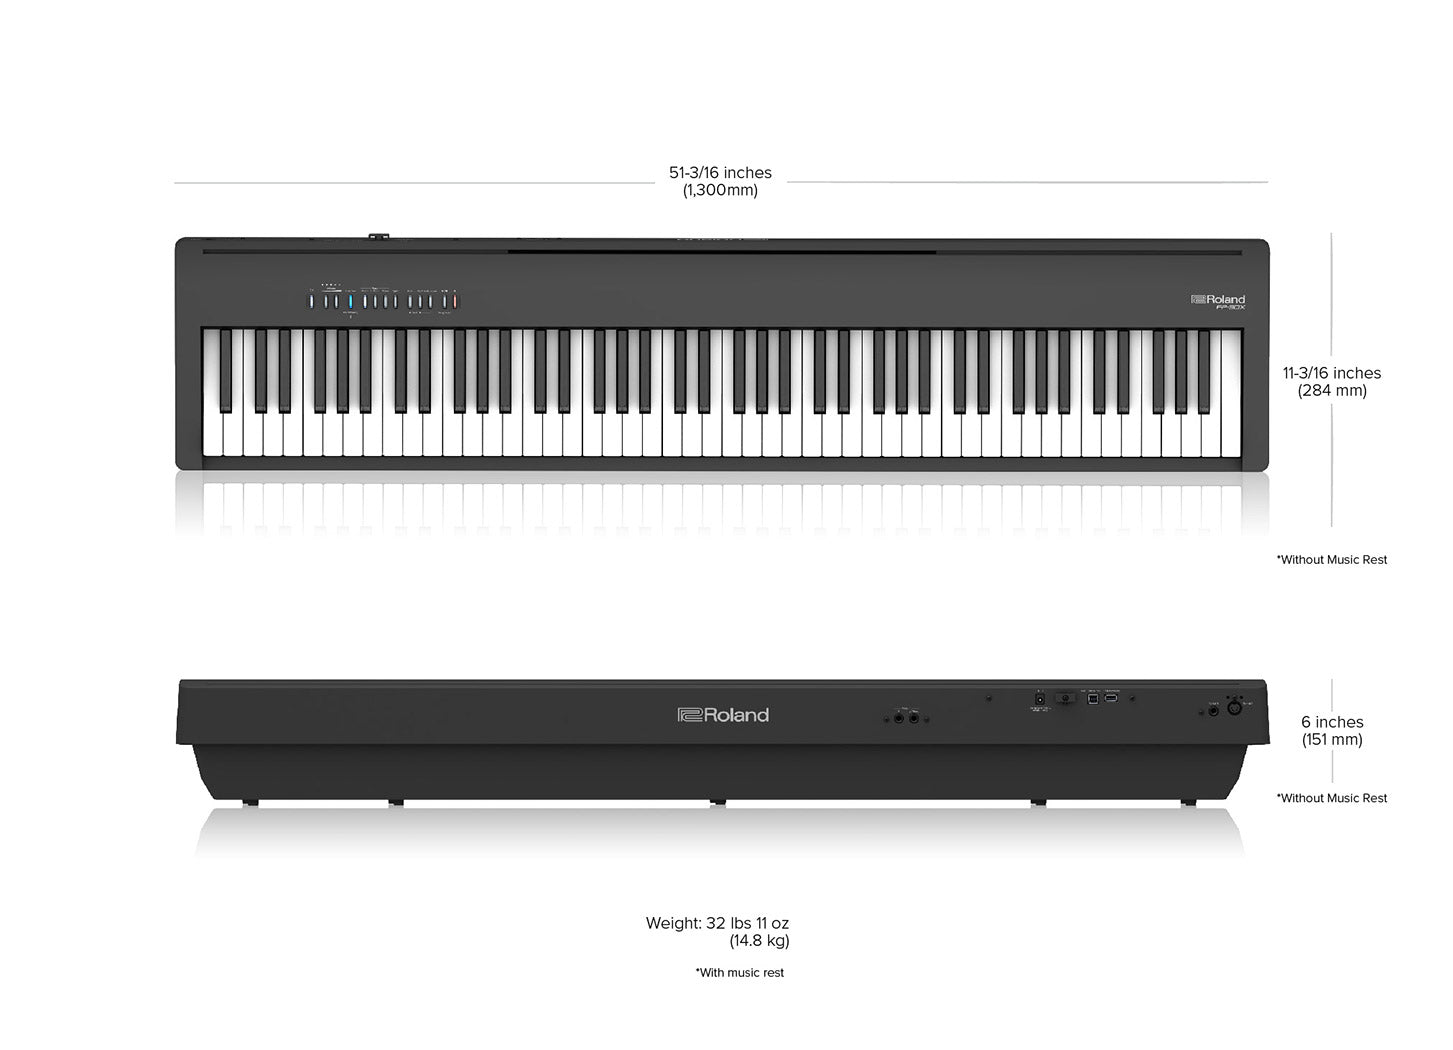 Roland FP-30X Digital Piano 88 keys With Wood stand & Tri Pedal Free with Roland RH-5 Headphone and Piano Bench - Black (FP30X / FP 30X), ROLAND, DIGITAL PIANO, roland-digital-piano-fp30x-bk, ZOSO MUSIC SDN BHD